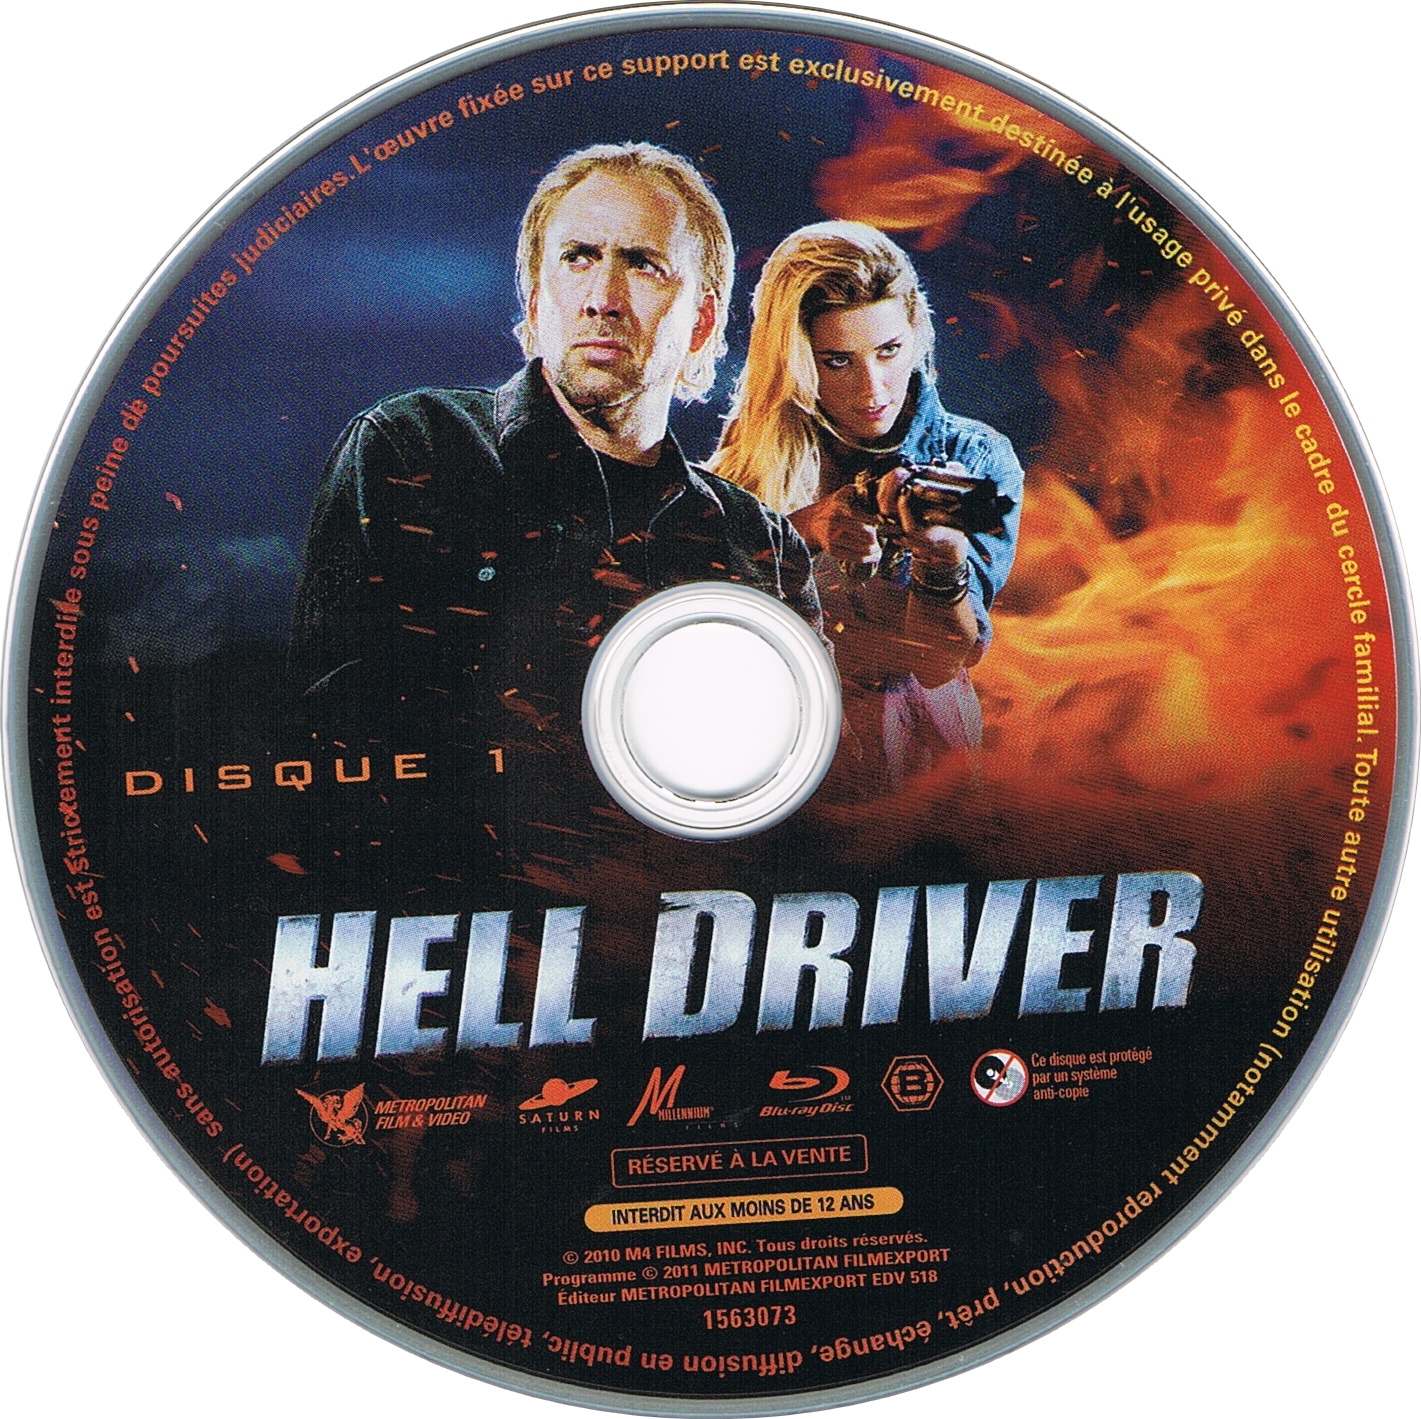 Hell Driver (BLU-RAY) DISC 1